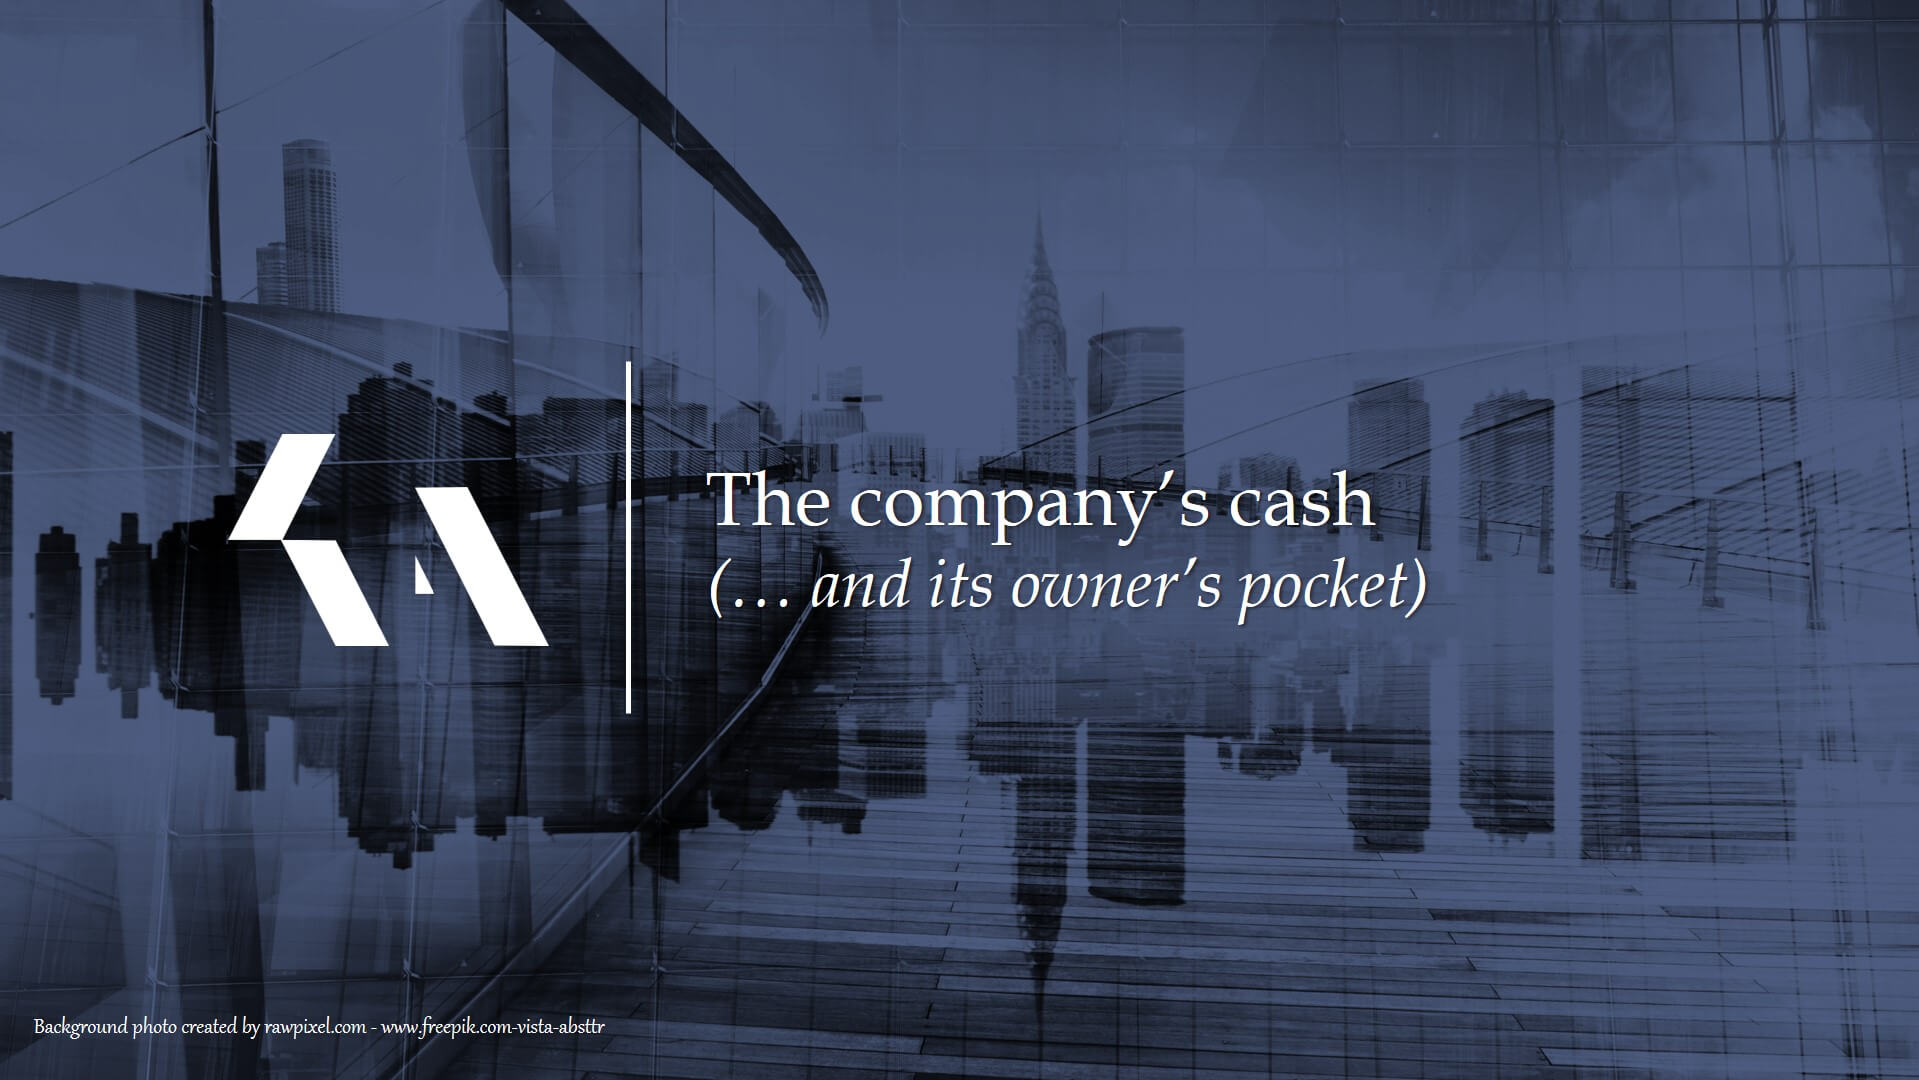 The company’s cash (… and its owner’s pocket)